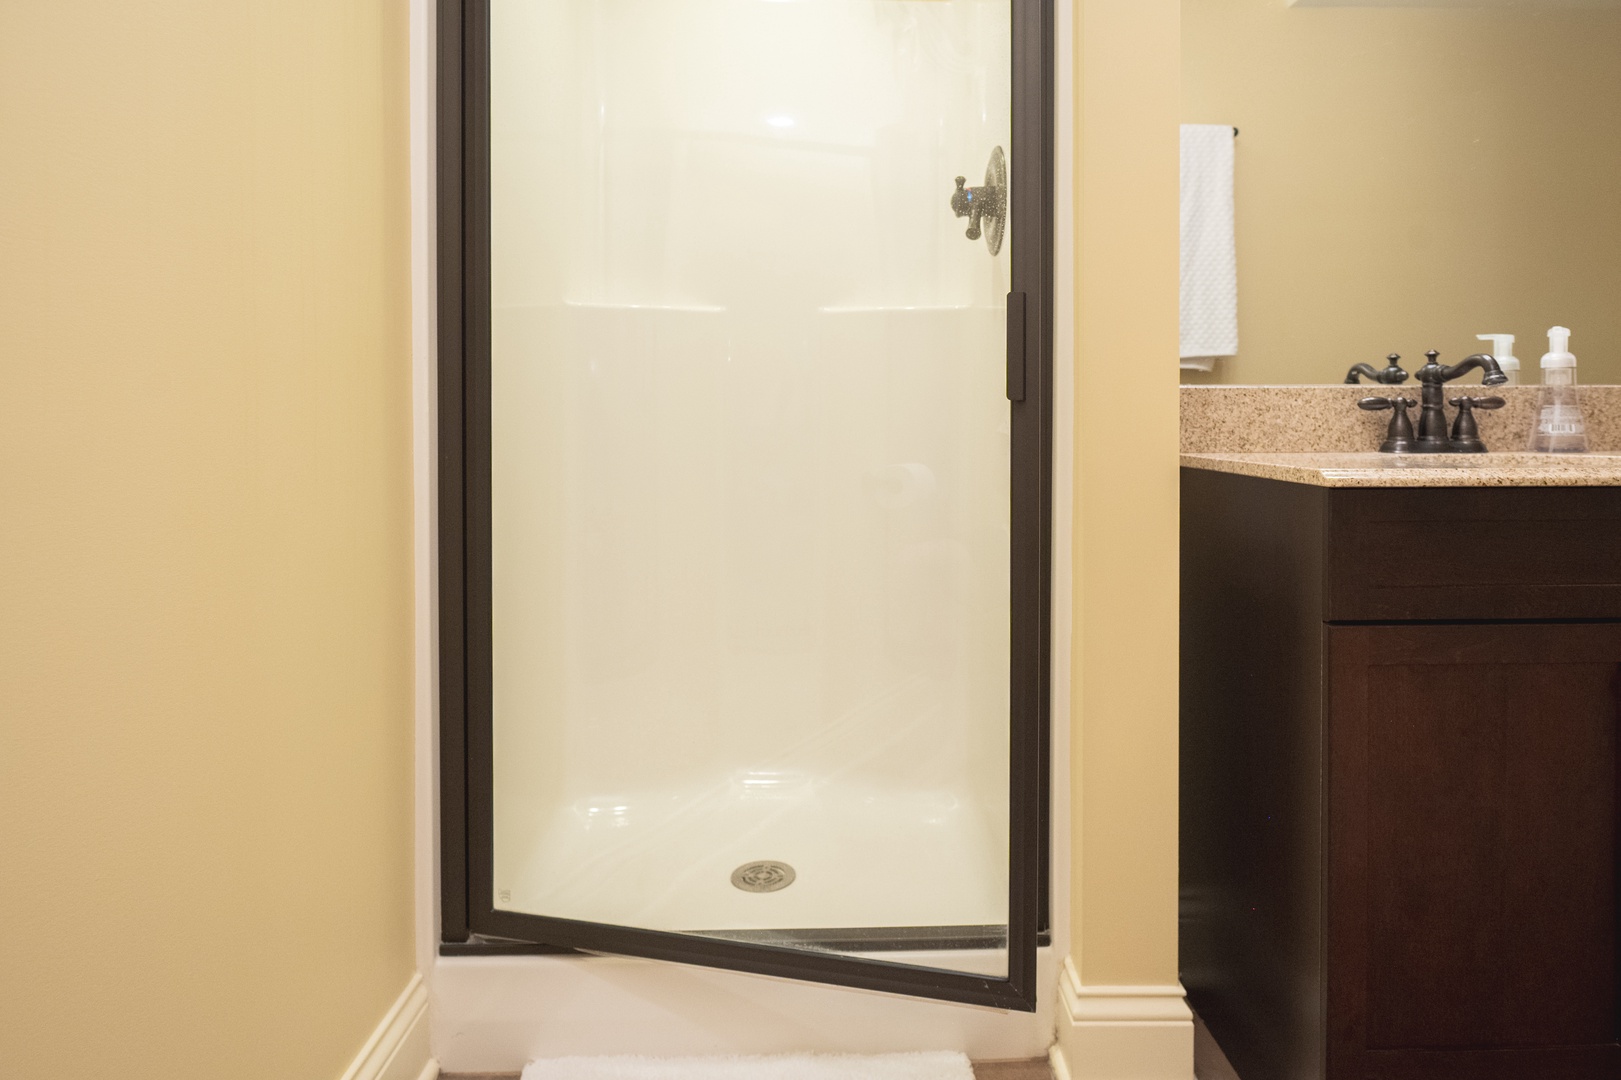 The lower-level full bathroom offers a single vanity & glass shower